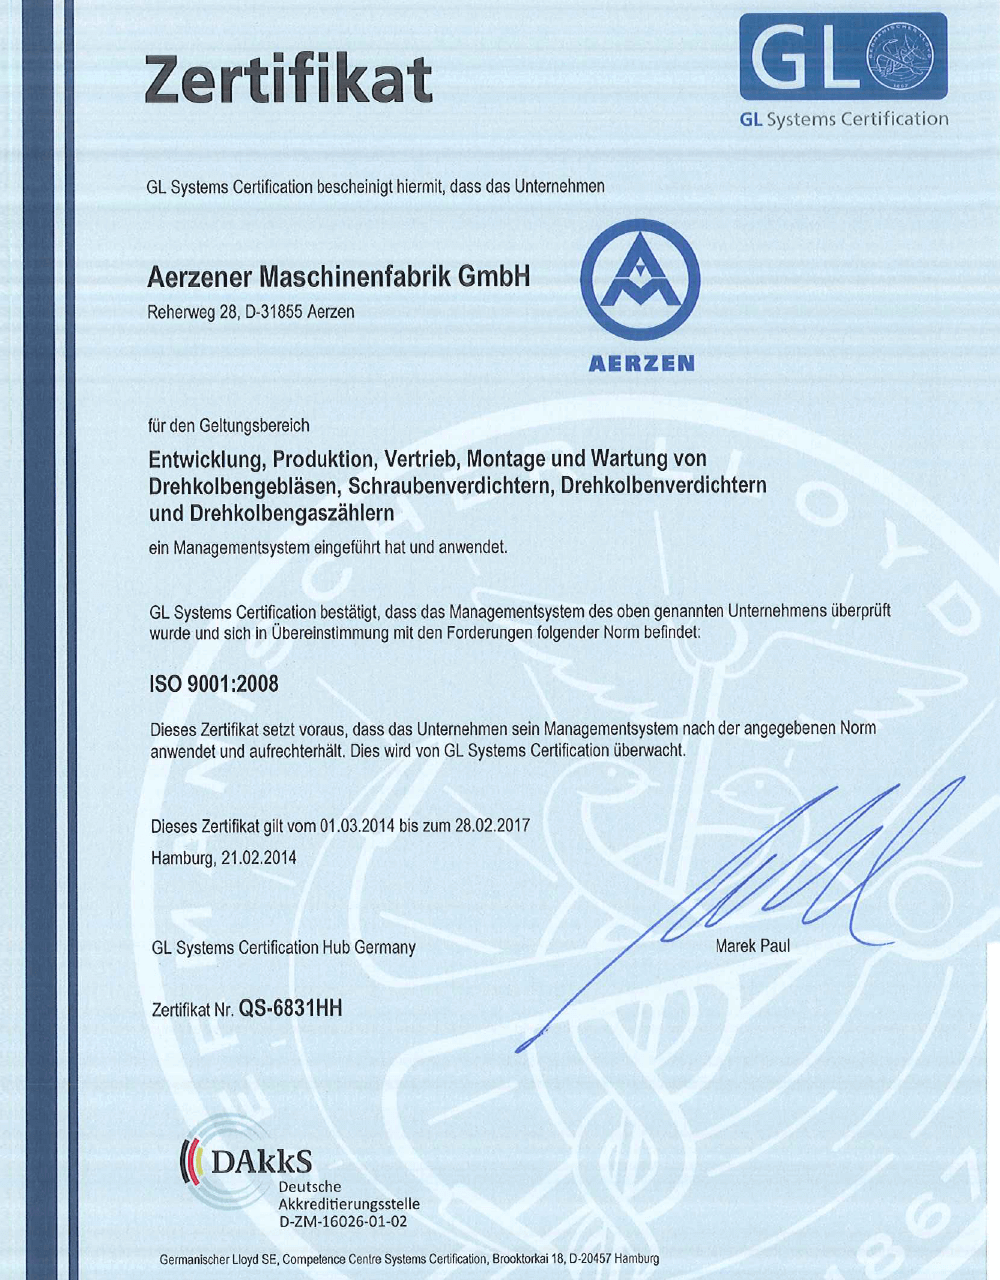 The quality orientation certificated acc. to DIN ISO 9001